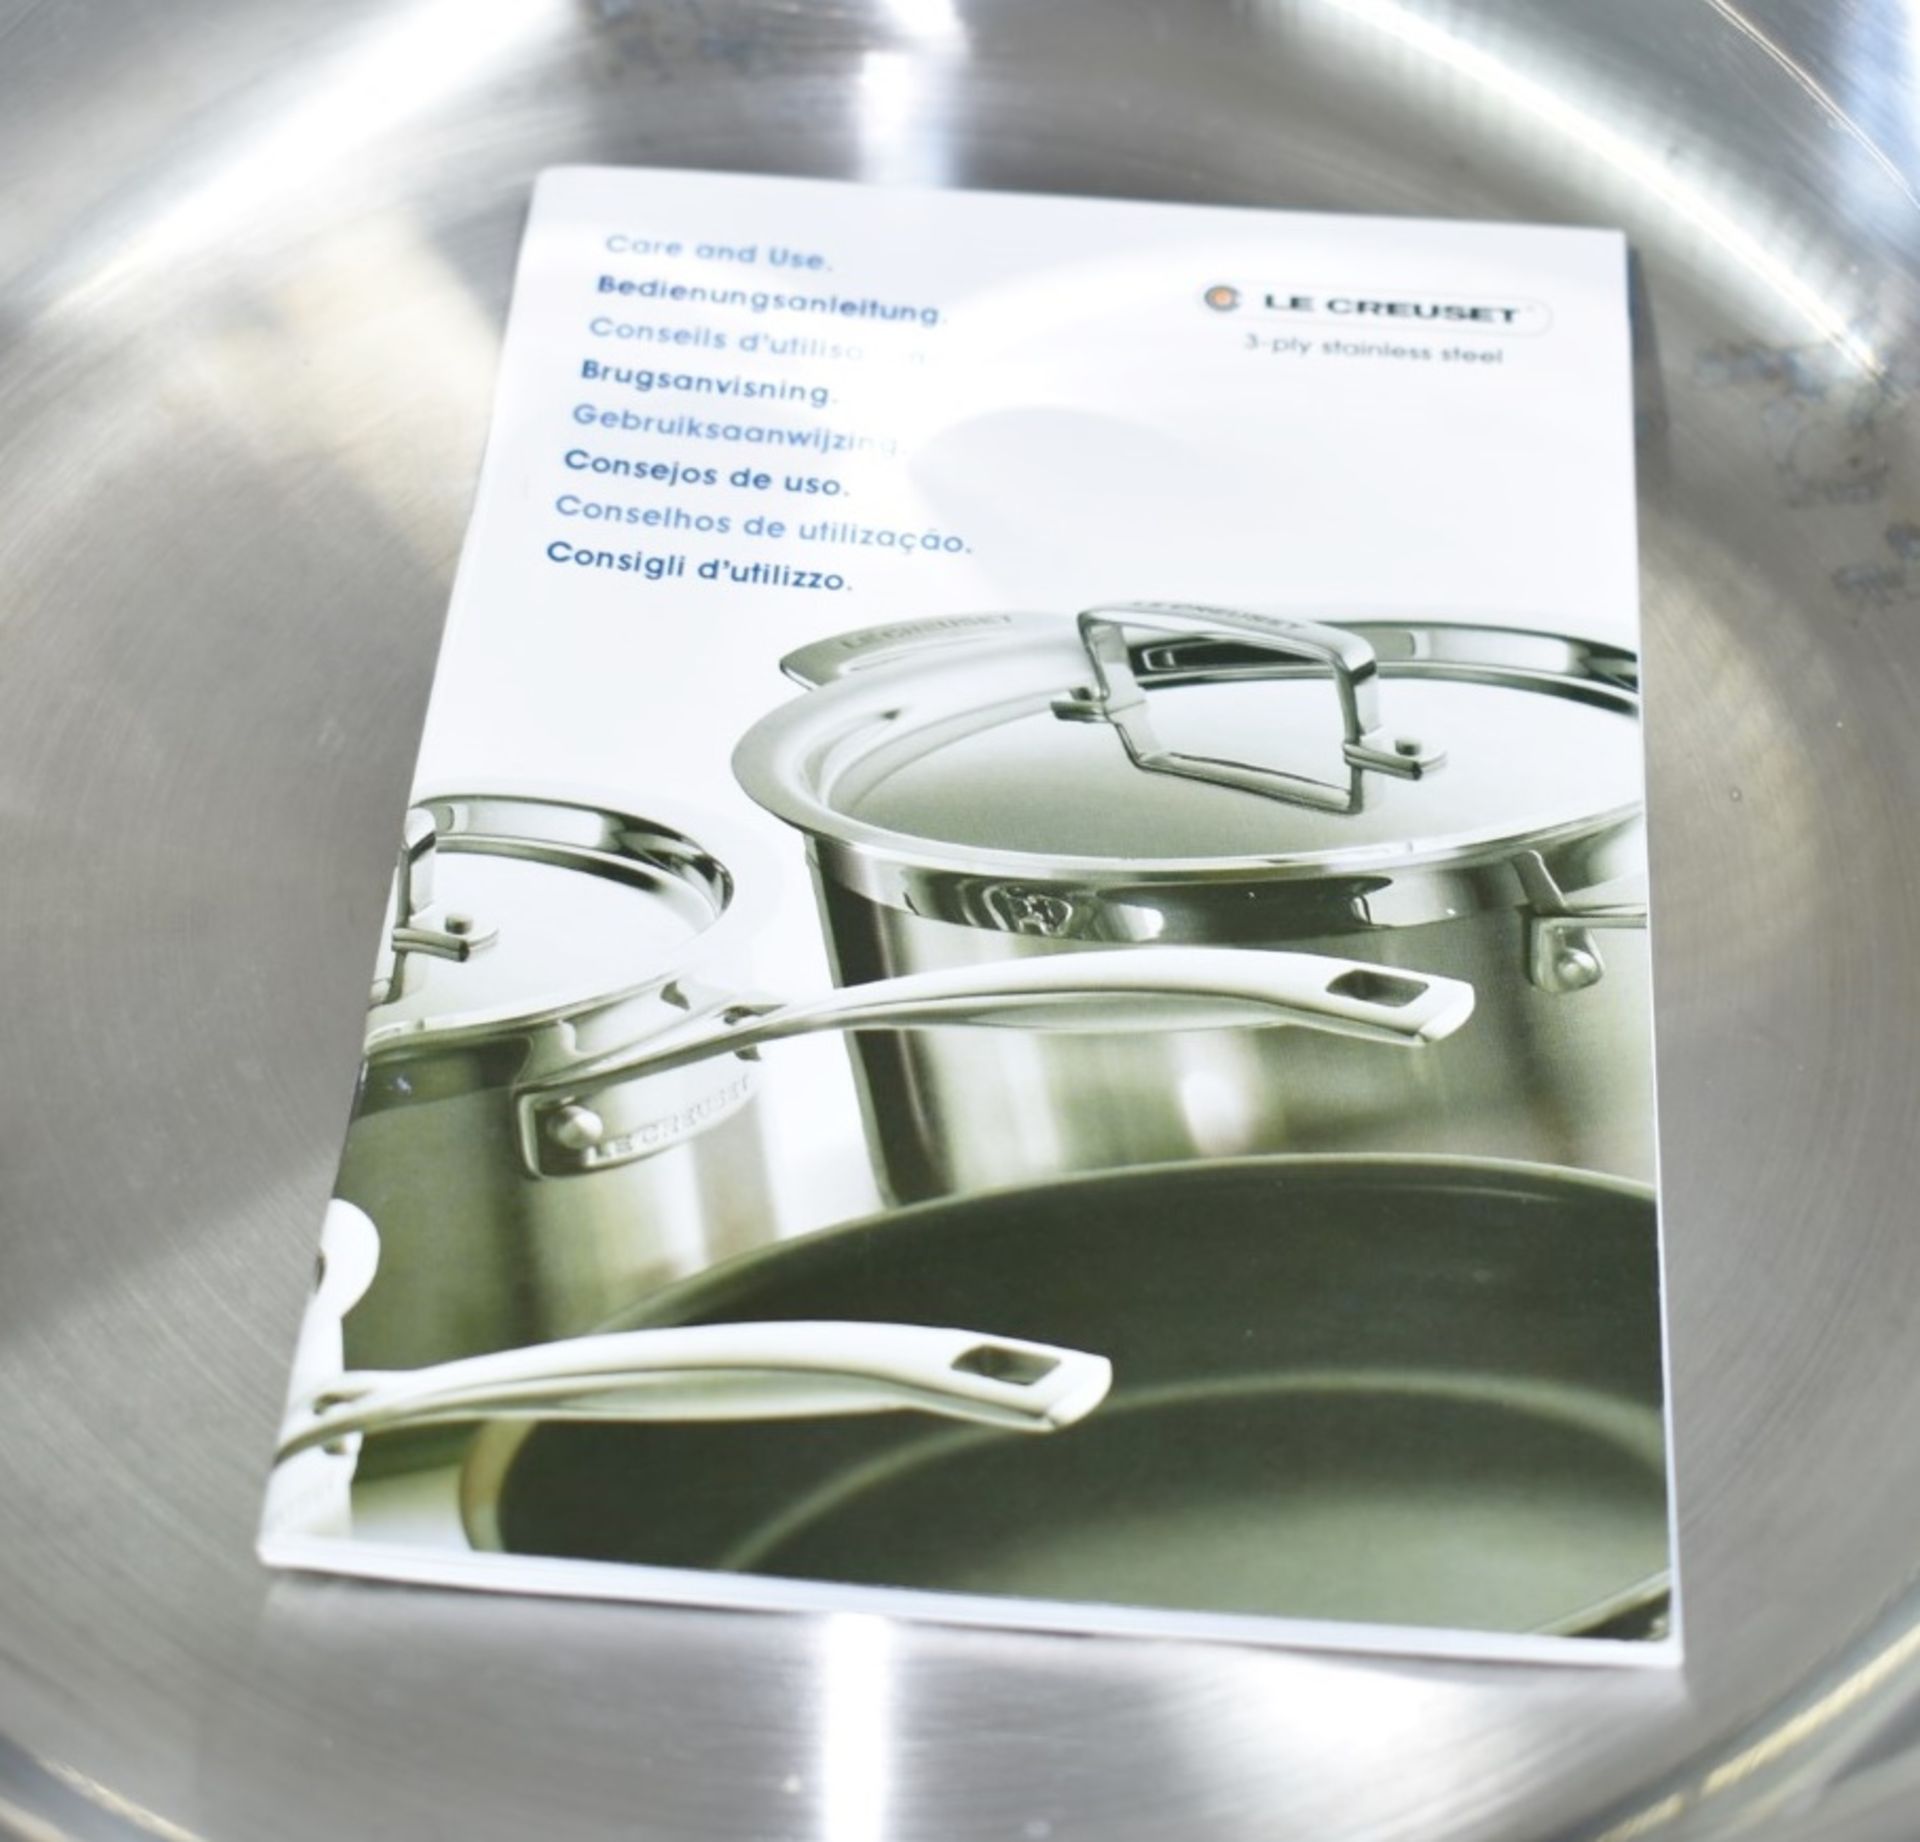 1 x LE CREUSET 3-Ply Stainless Steel Shallow Casserole Dish (26cm) - Original Price £135.00 - Image 7 of 9